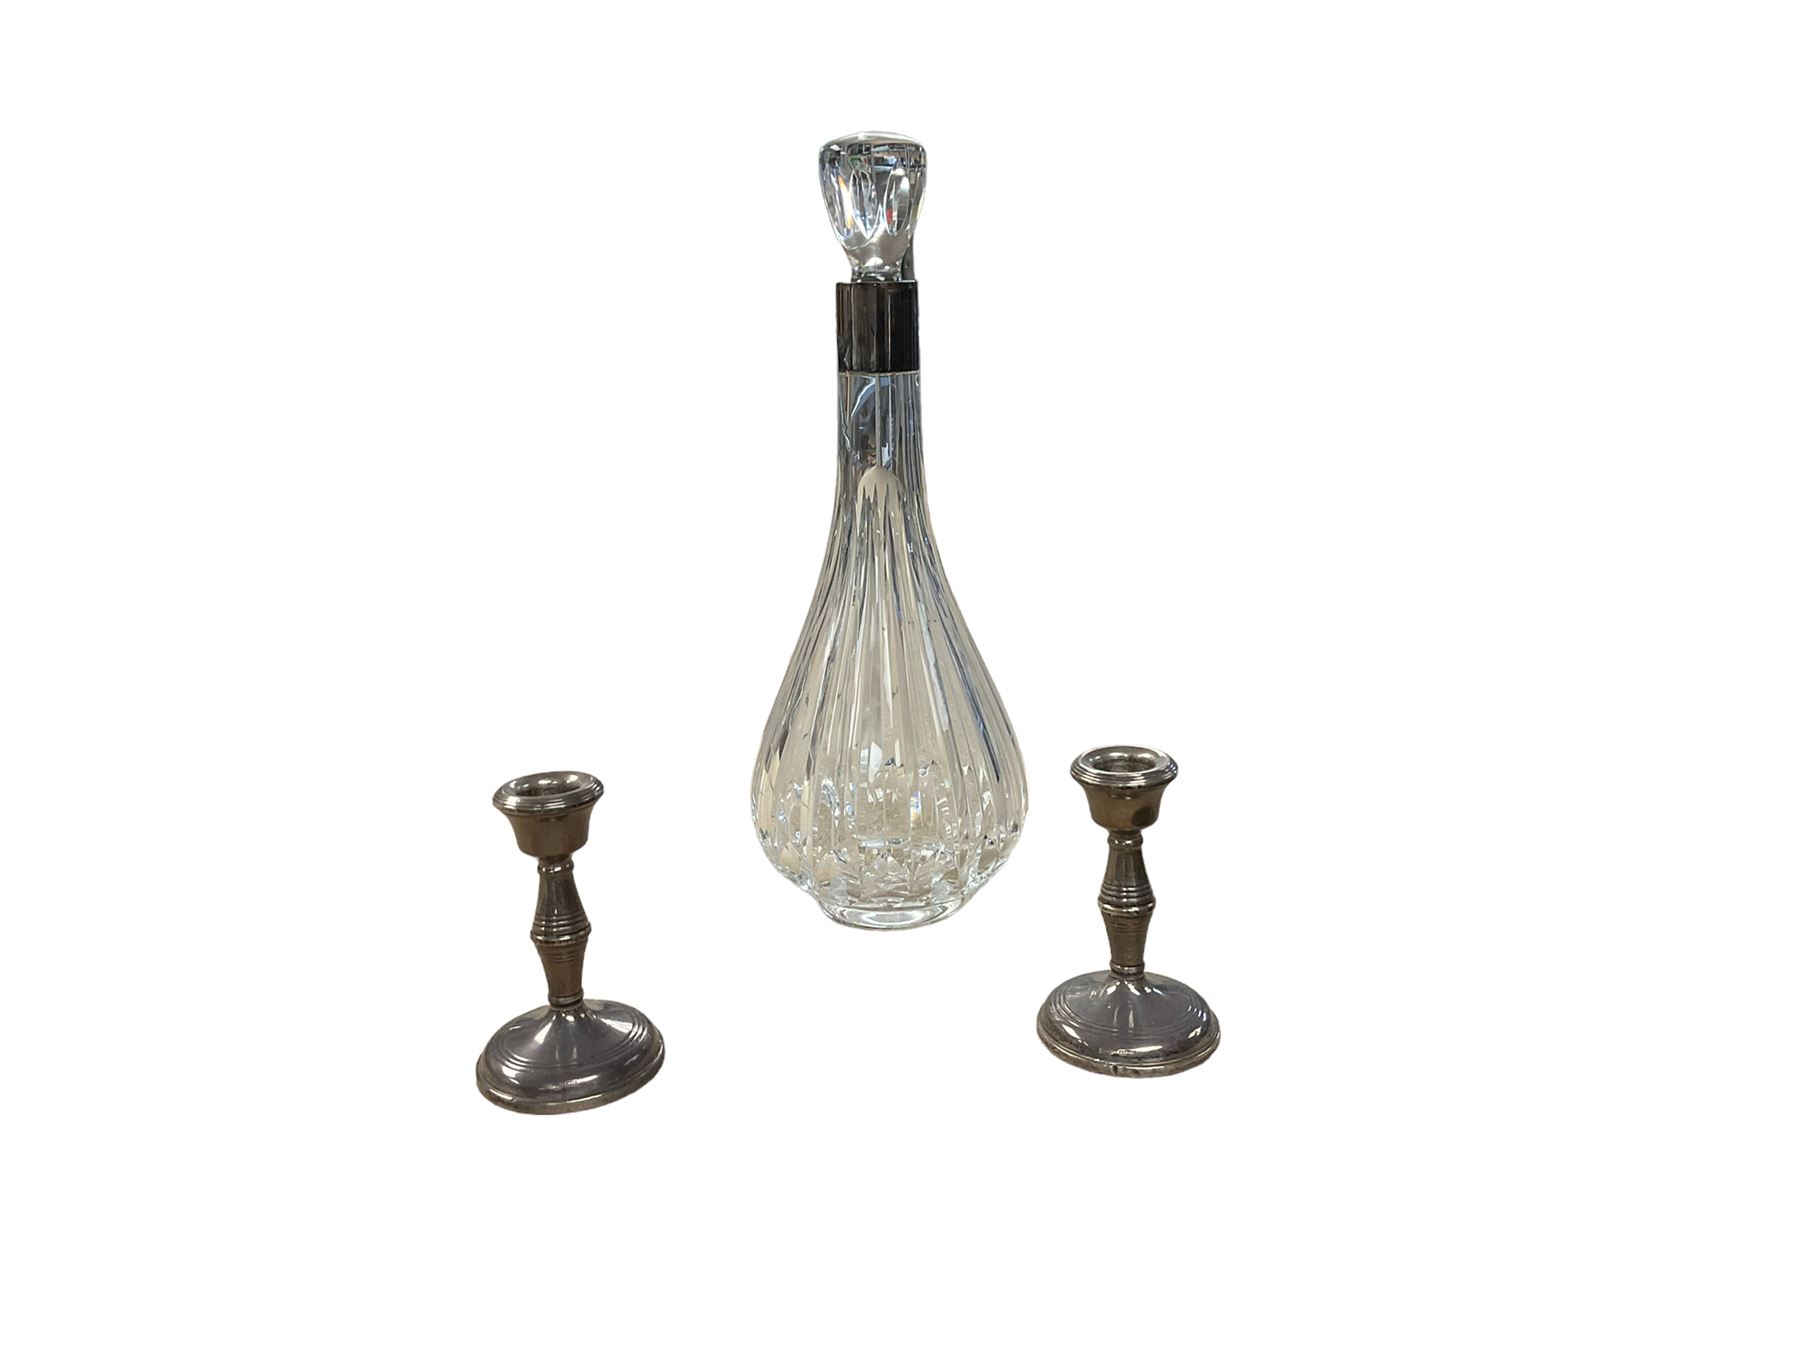 Silver collar decanter together with two silver candlesticks